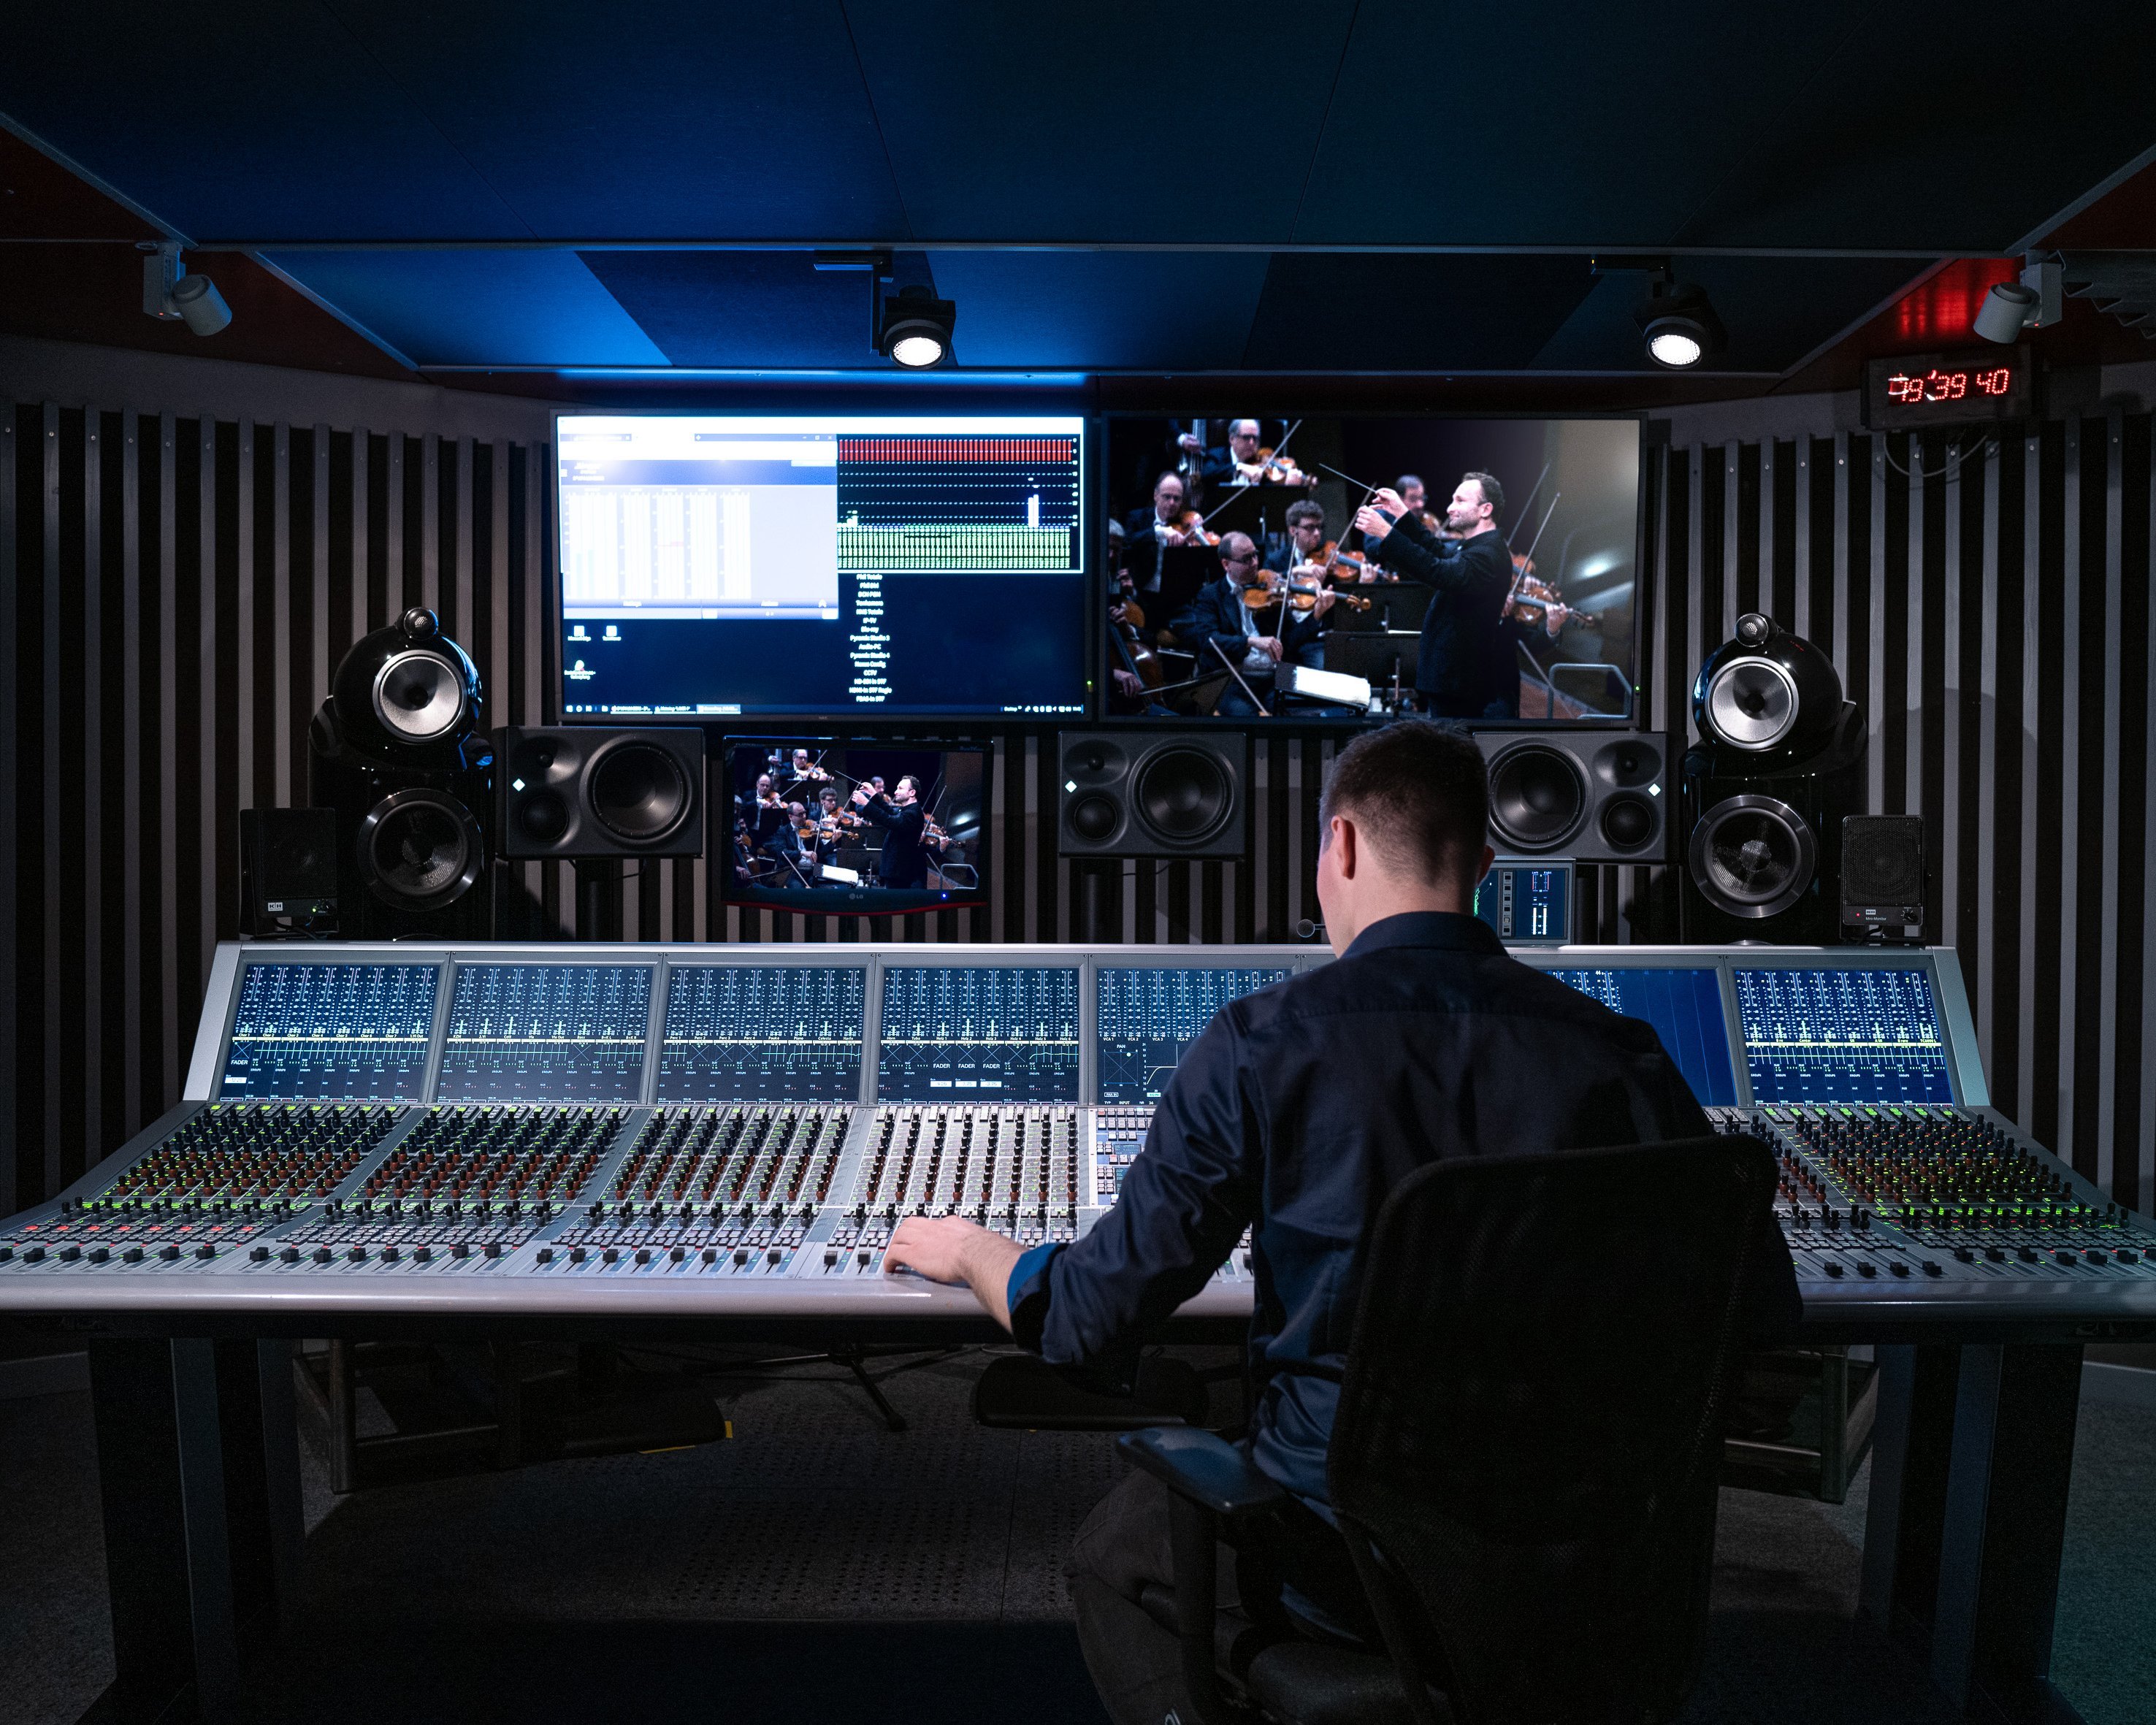 A tonmeister is sitting in front of a mixing desk.